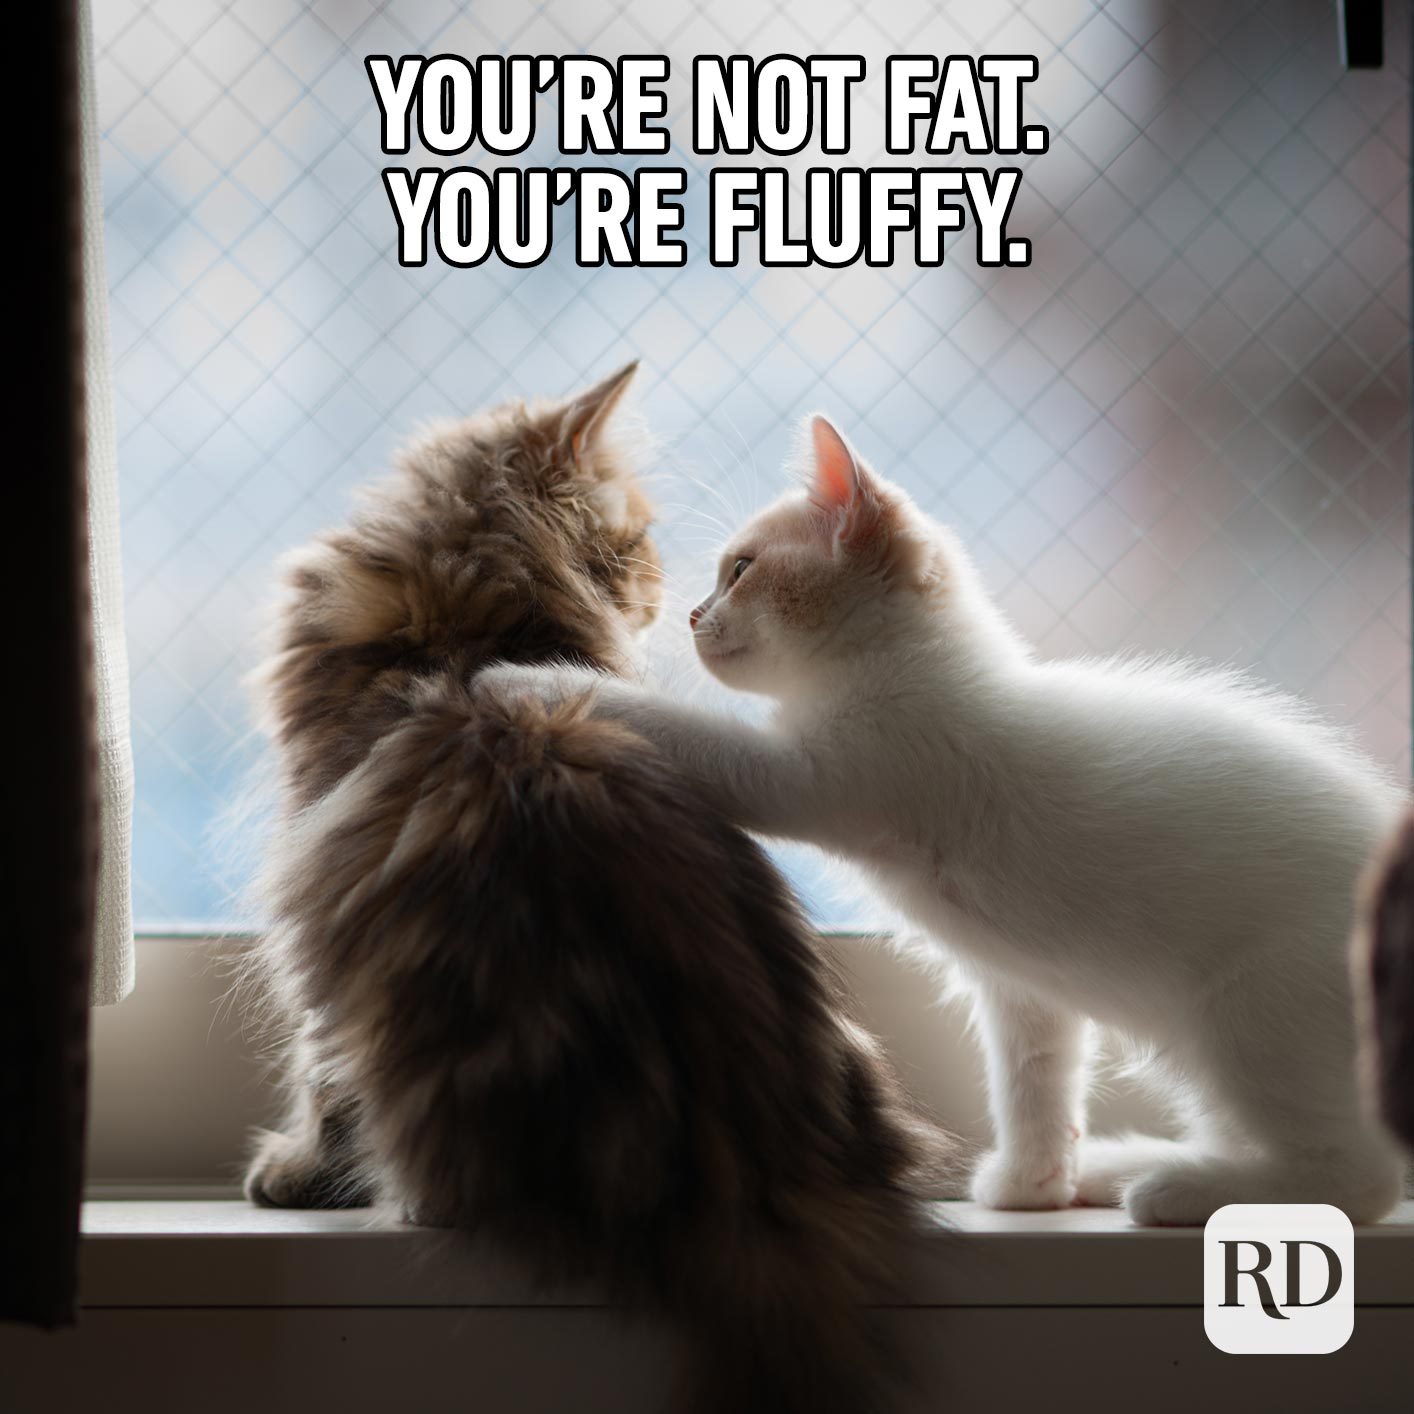 One cat putting its arm around another cat. Meme text: You’re not fat. You’re fluffy.